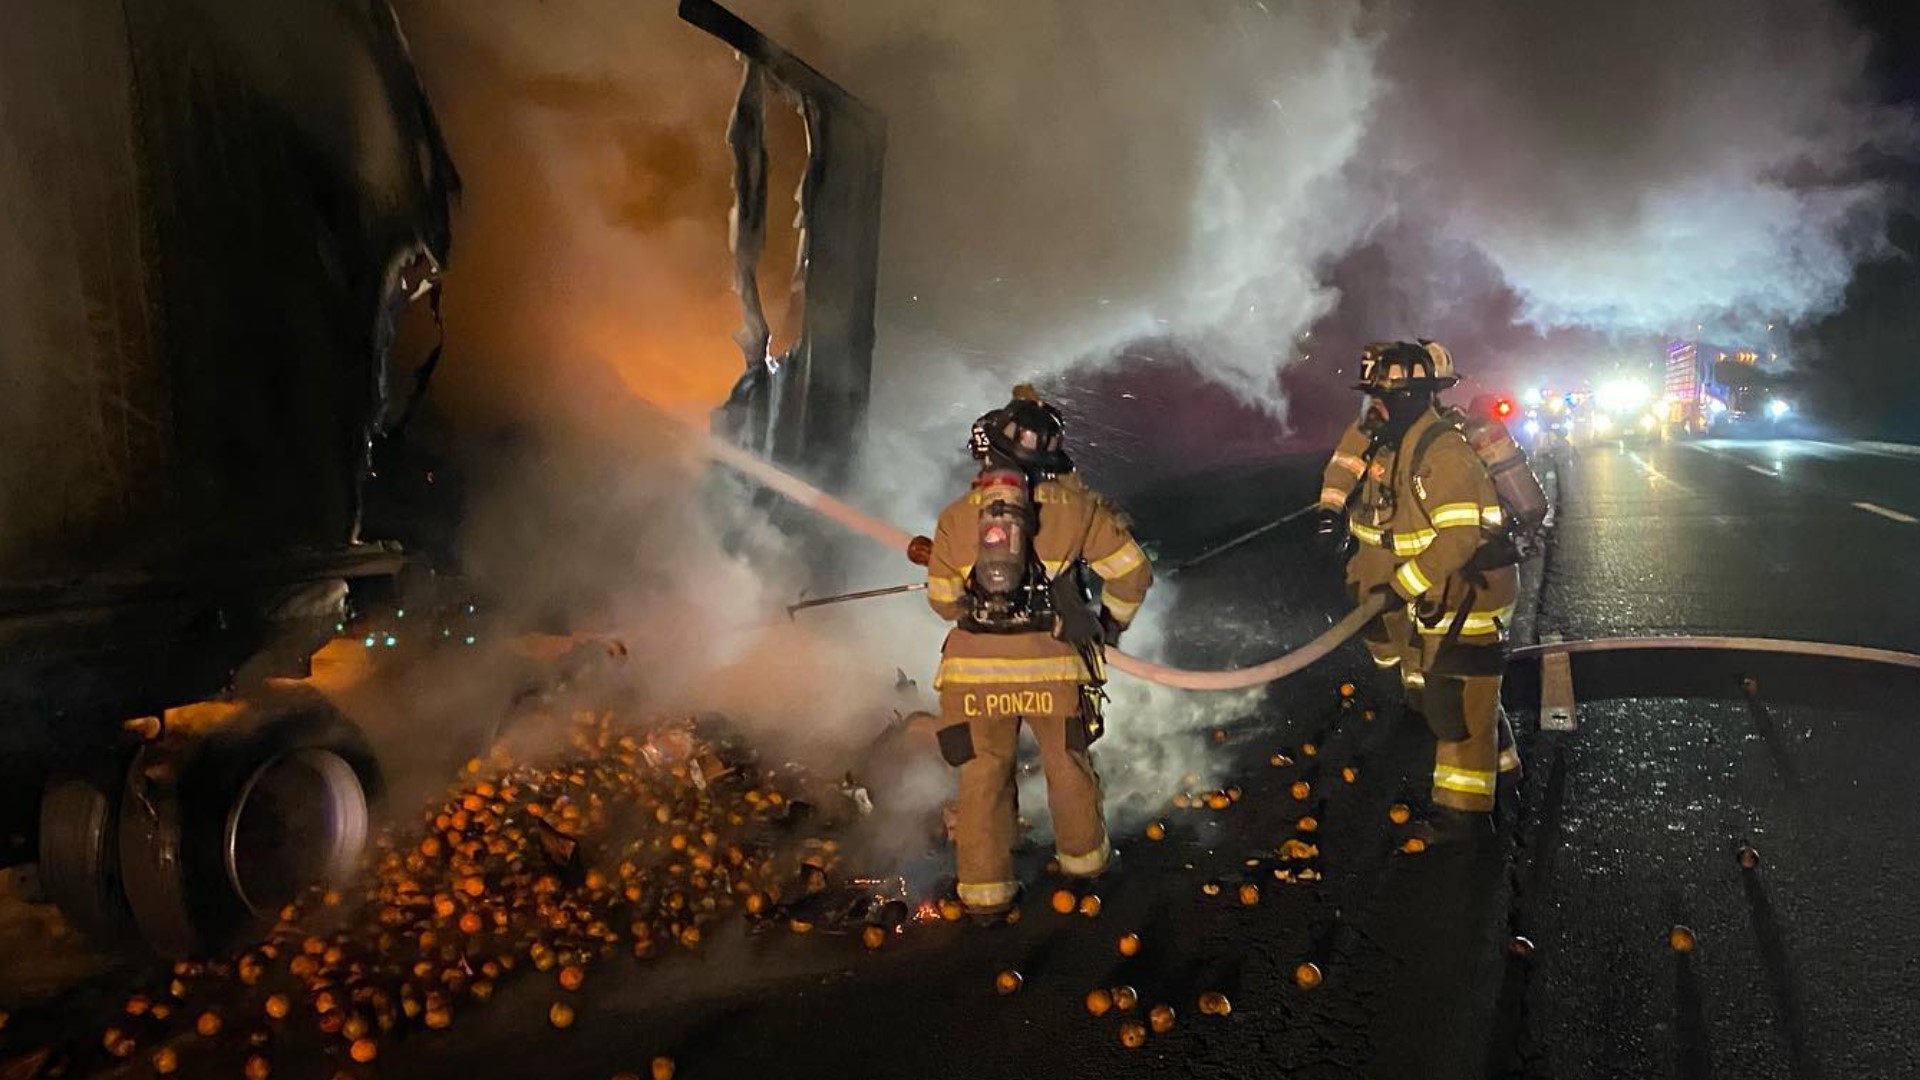 Crews in Middletown battled a fire overnight on I-91 when a tractor-trailer caught fire.